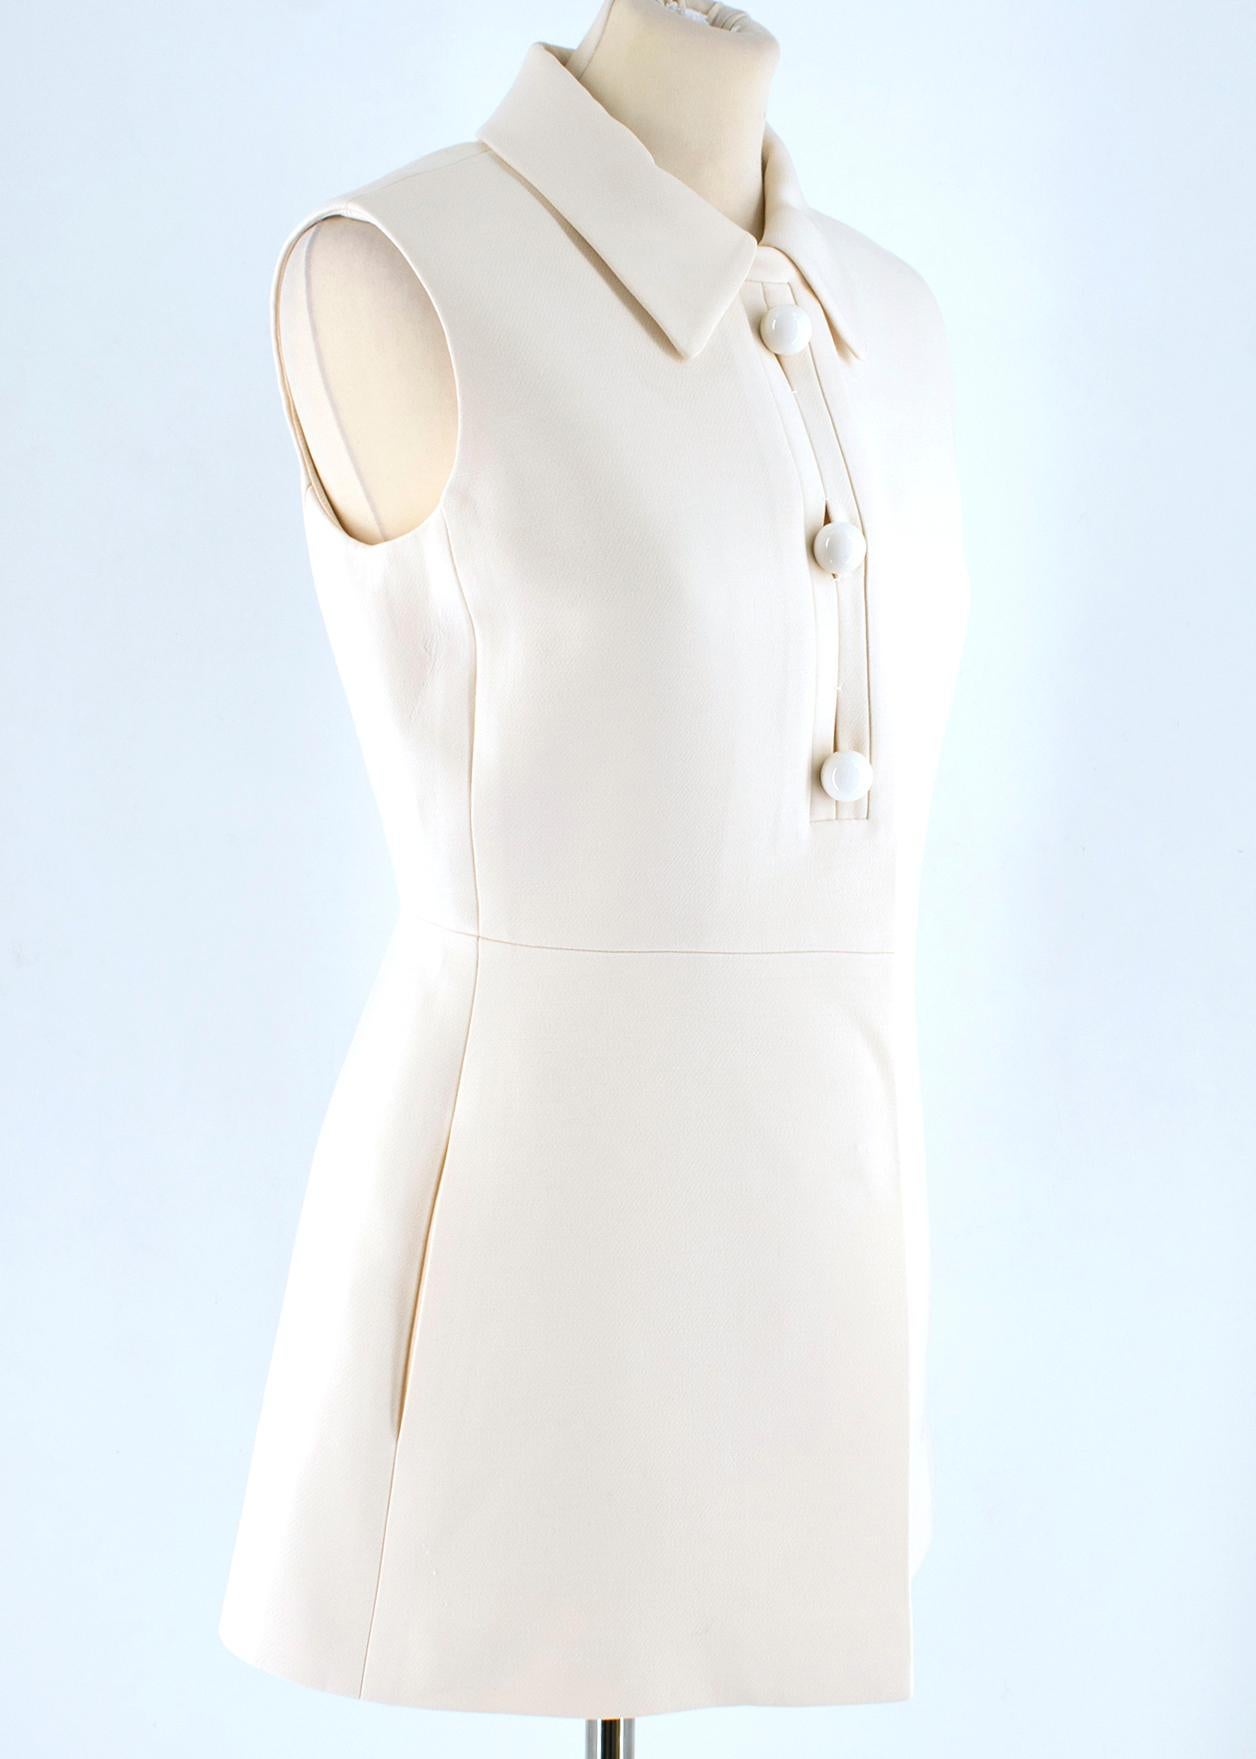 Prada Cream Sleeveless Wool Gilet

- beige wool gilet 
- sleeveless
- three buttons to the front and hidden push buttons closure
- lined

Please note, these items are pre-owned and may show some signs of storage, even when unworn and unused. This is